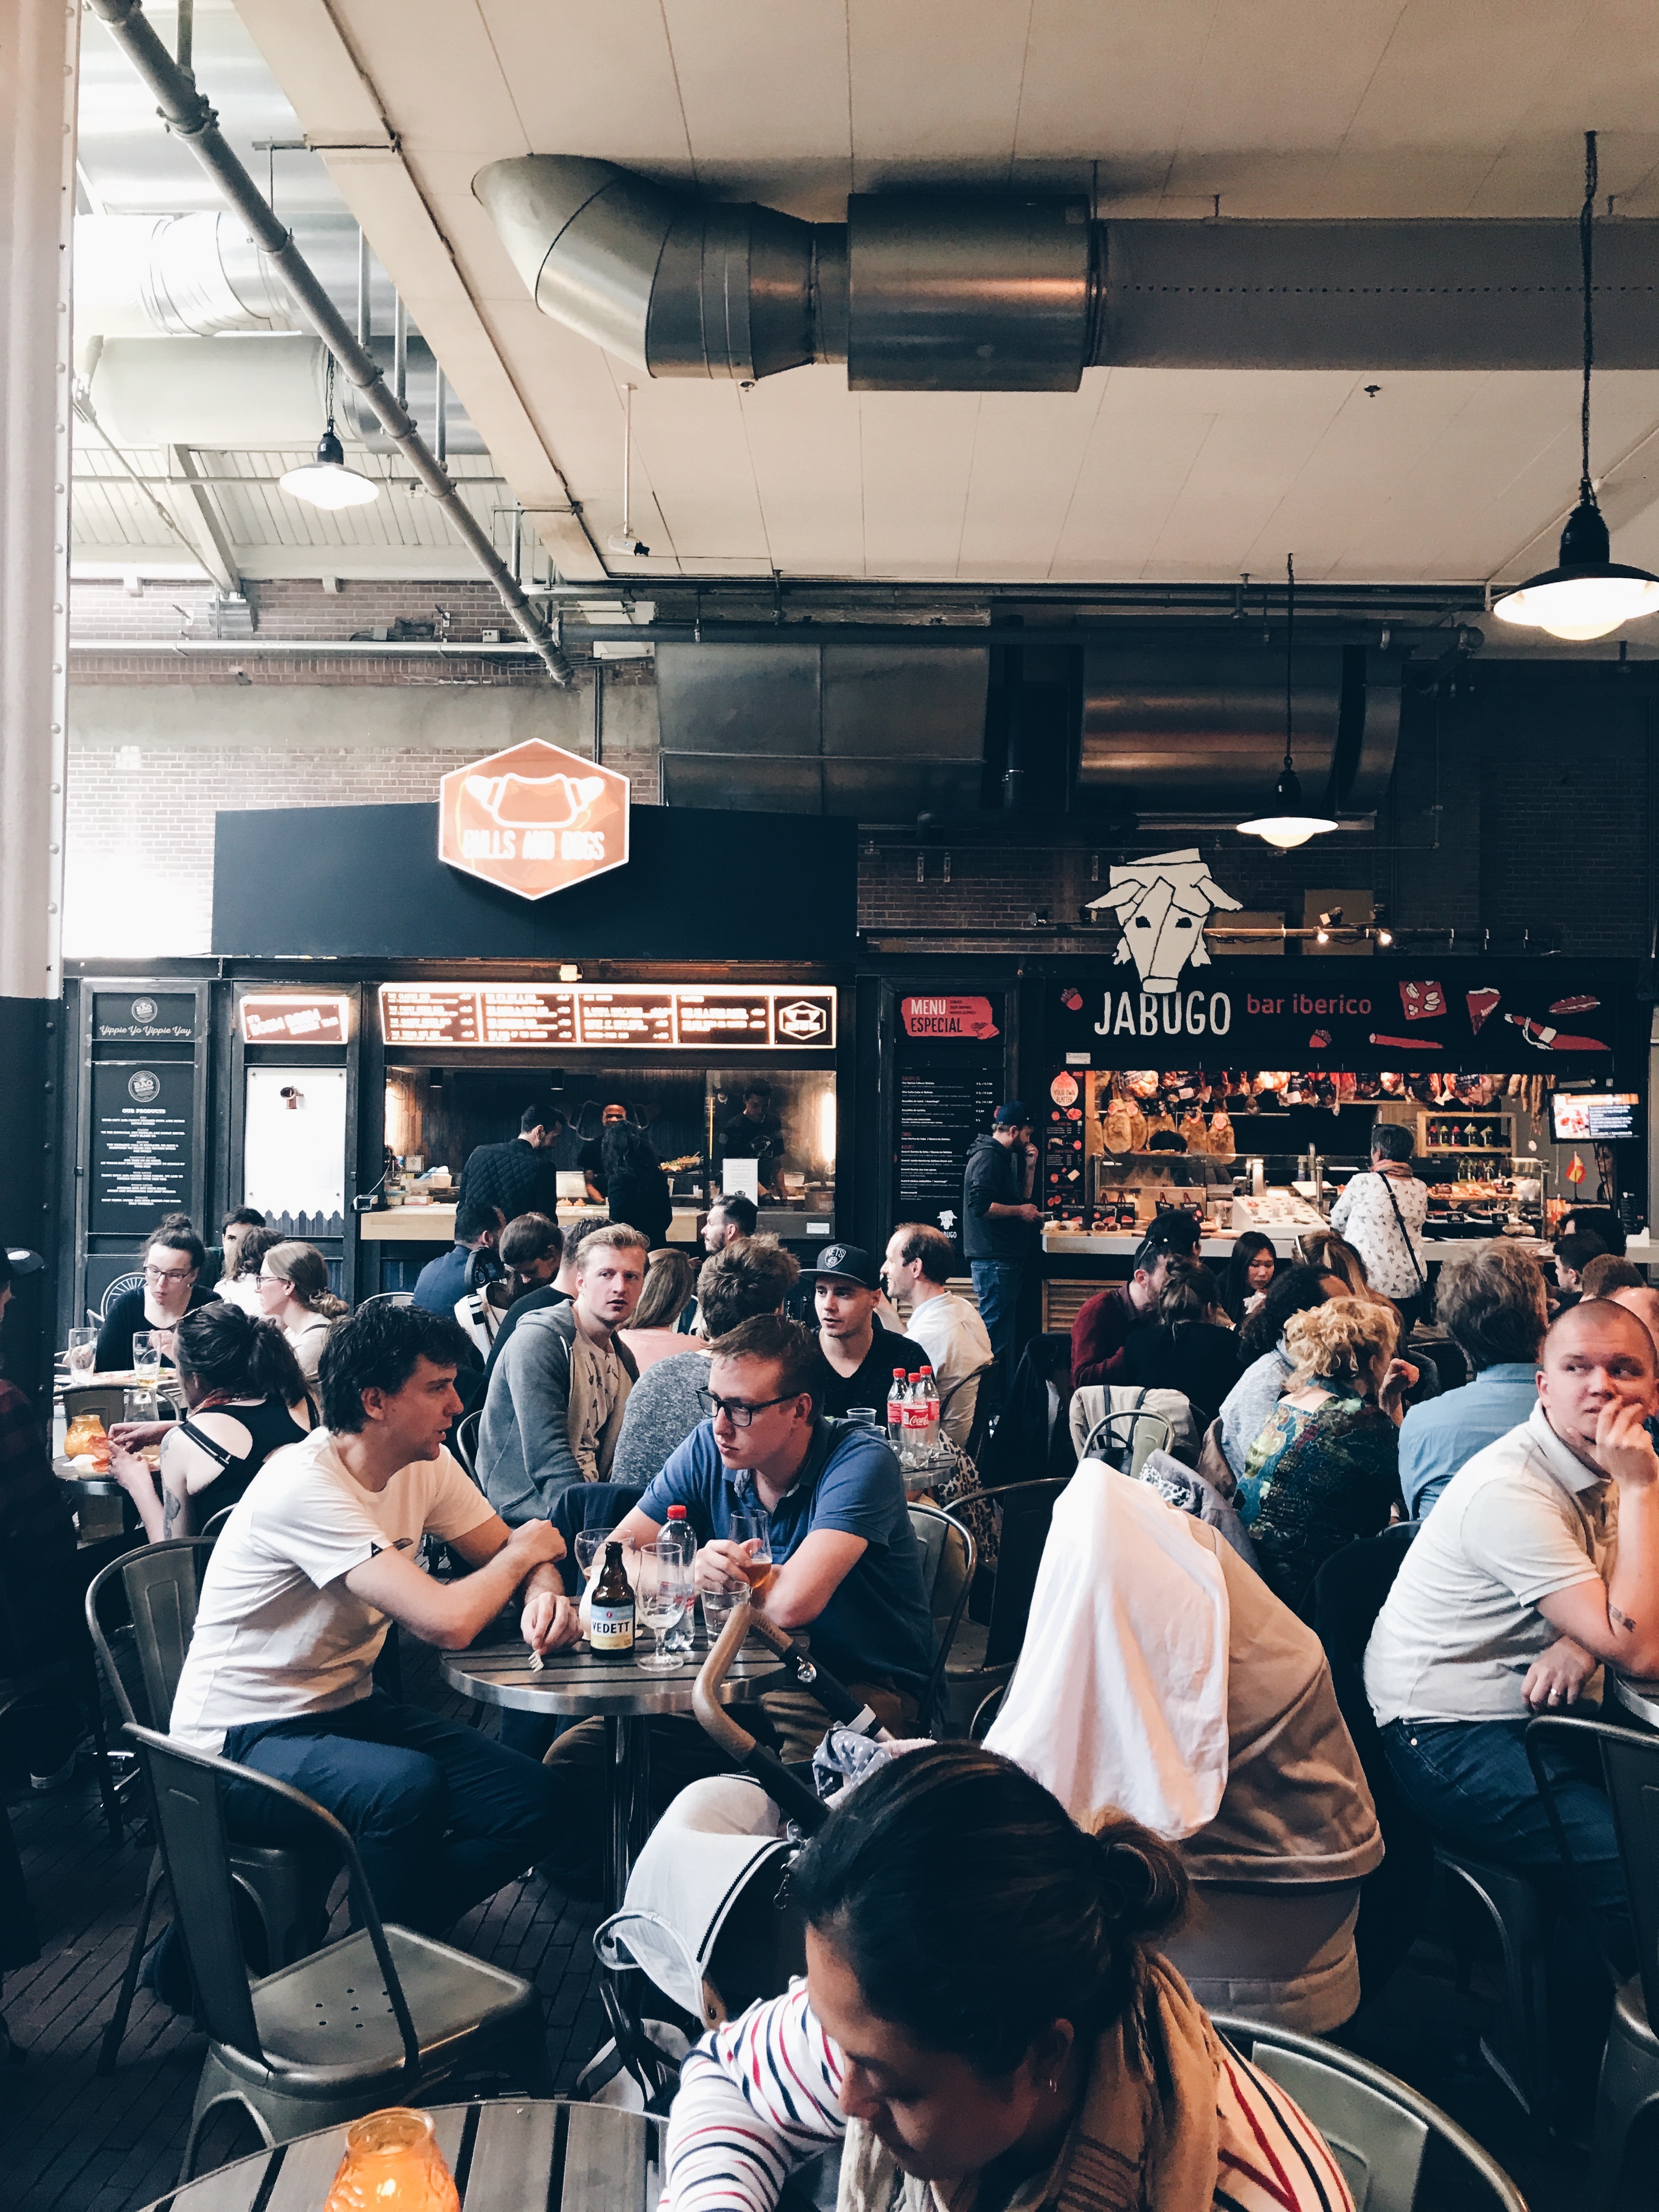 The Foodhallen in Amsterdam , the best place for foodies